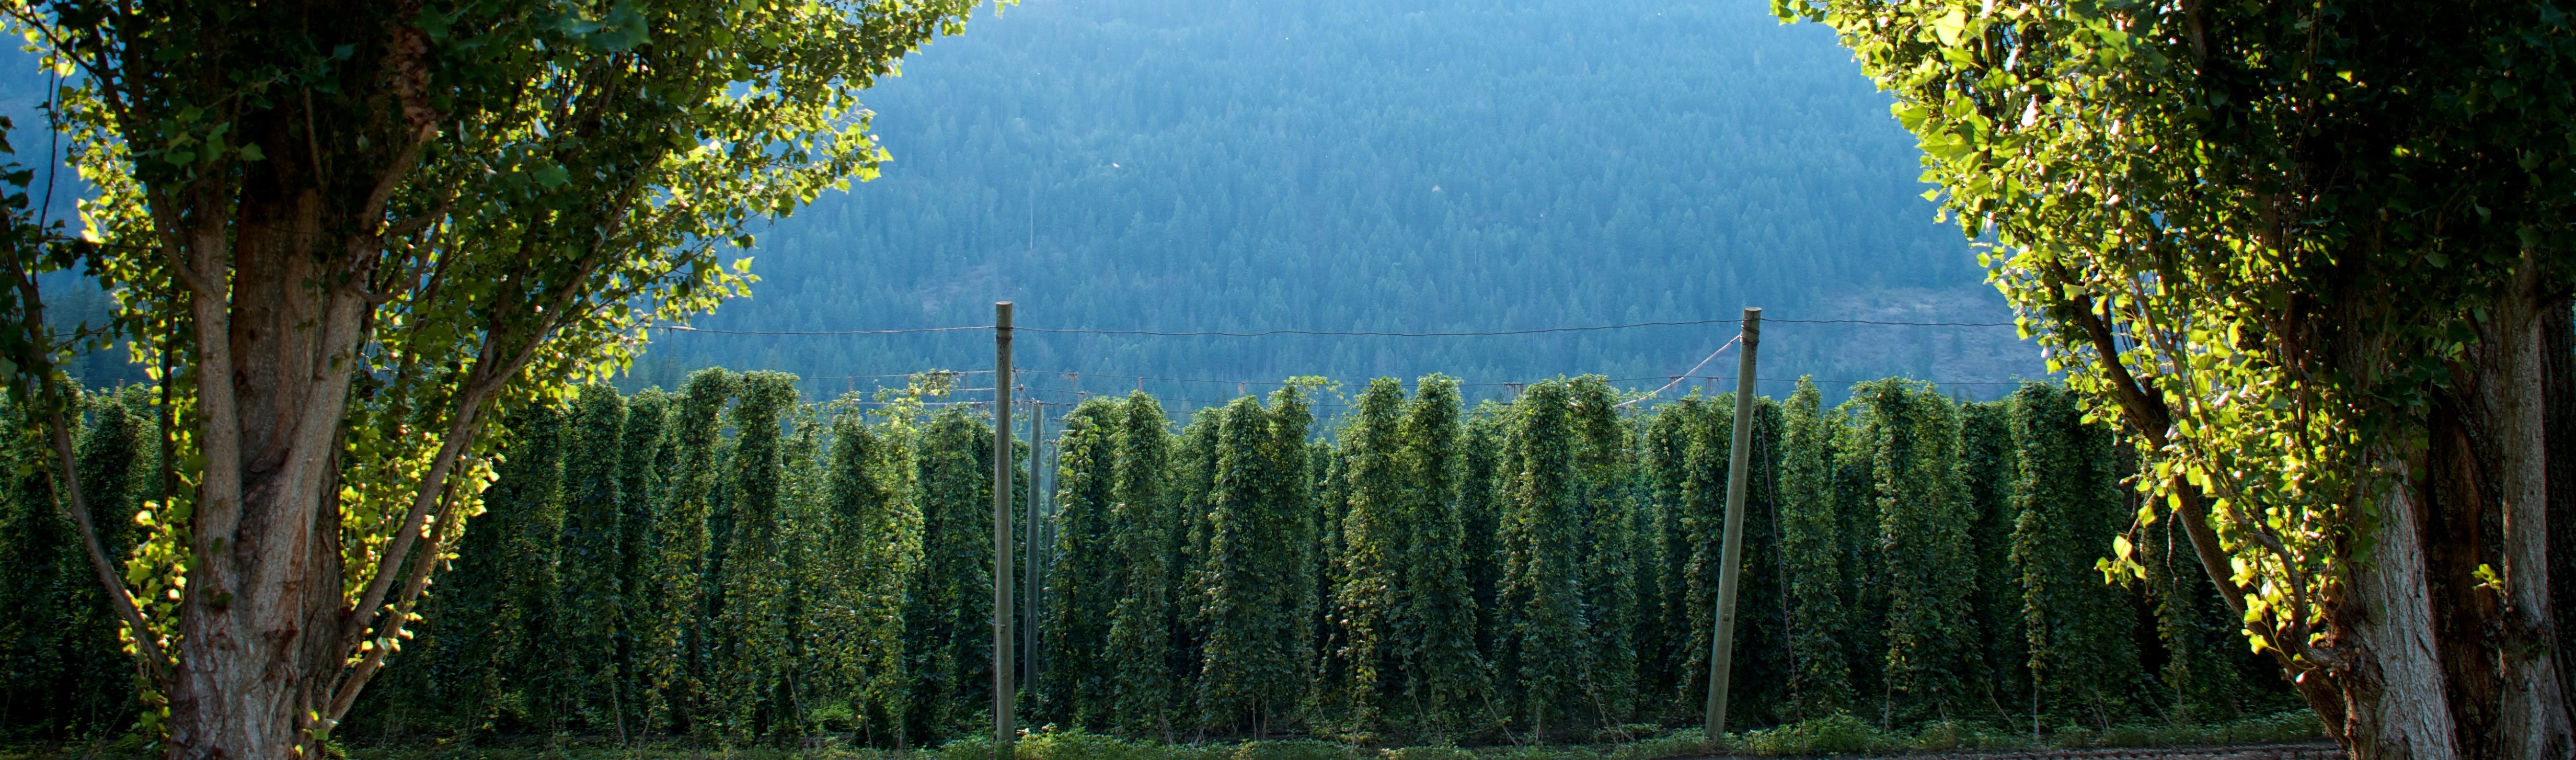 Growing Hops: A Chat with Ed Atkins of Elk Mountain Farm